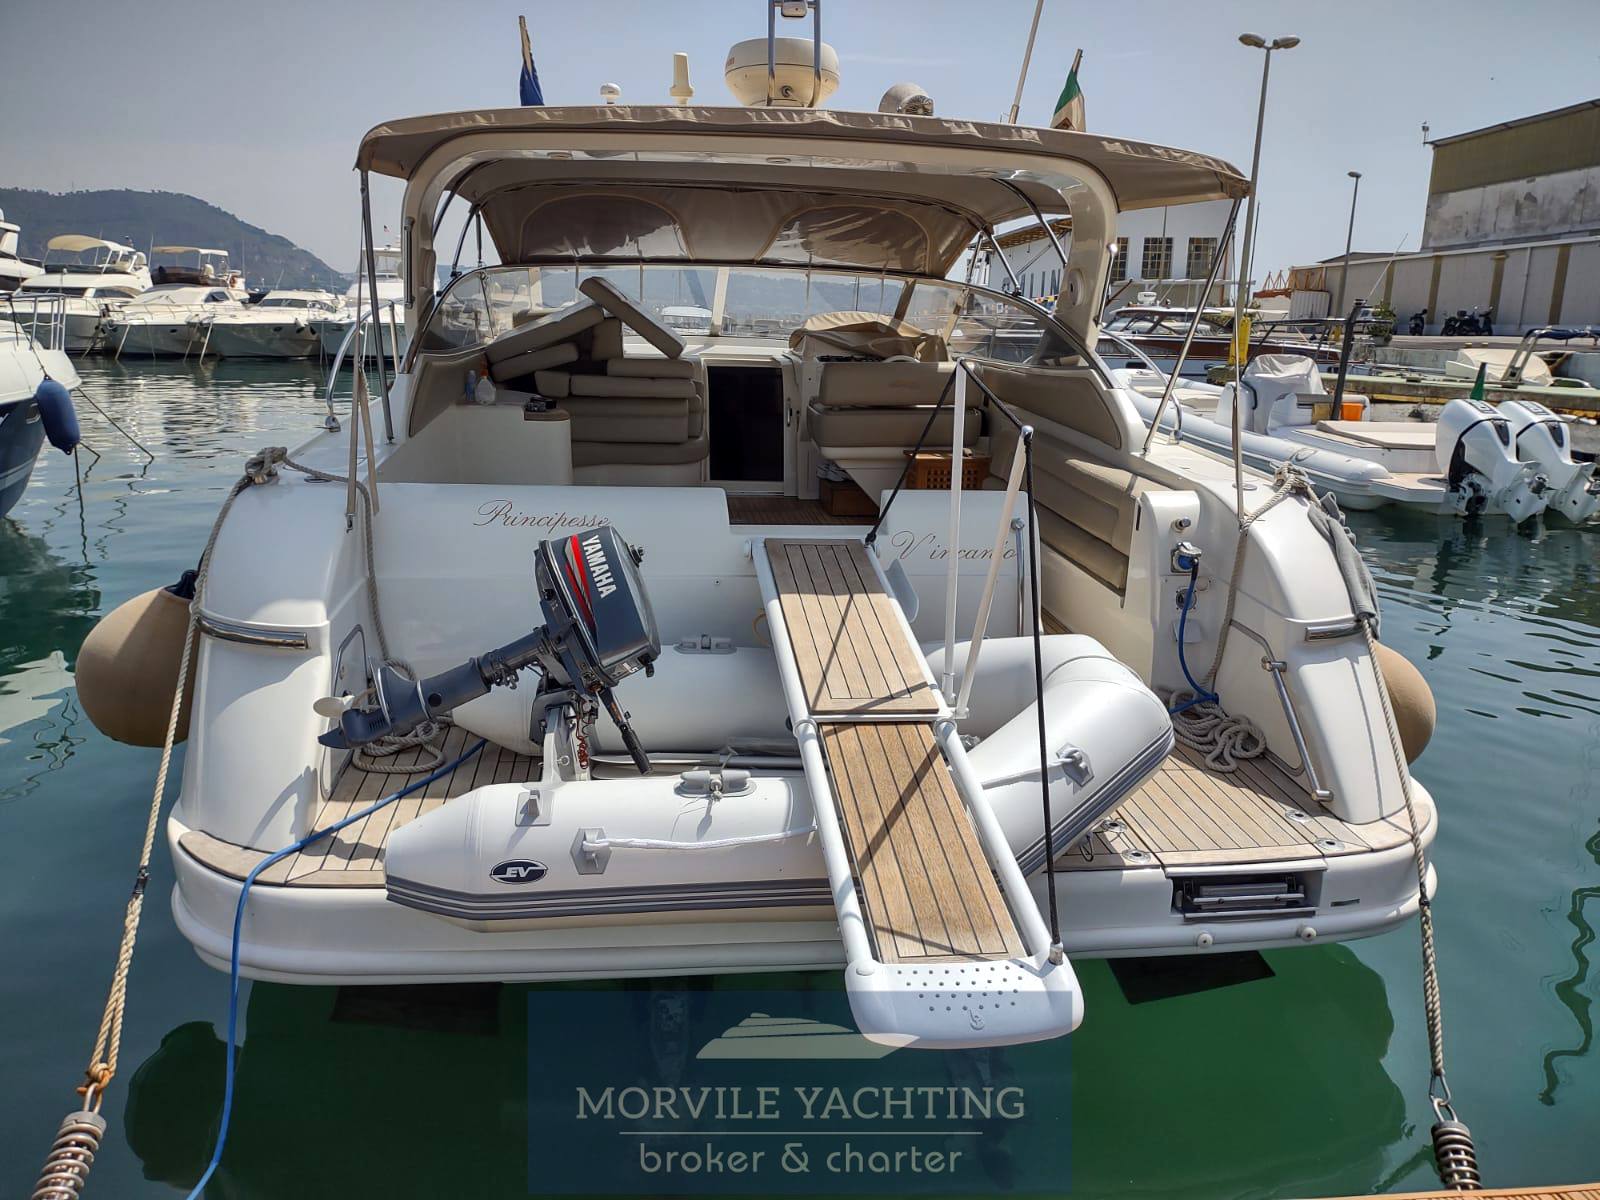 FIART 40 Motor boat used for sale